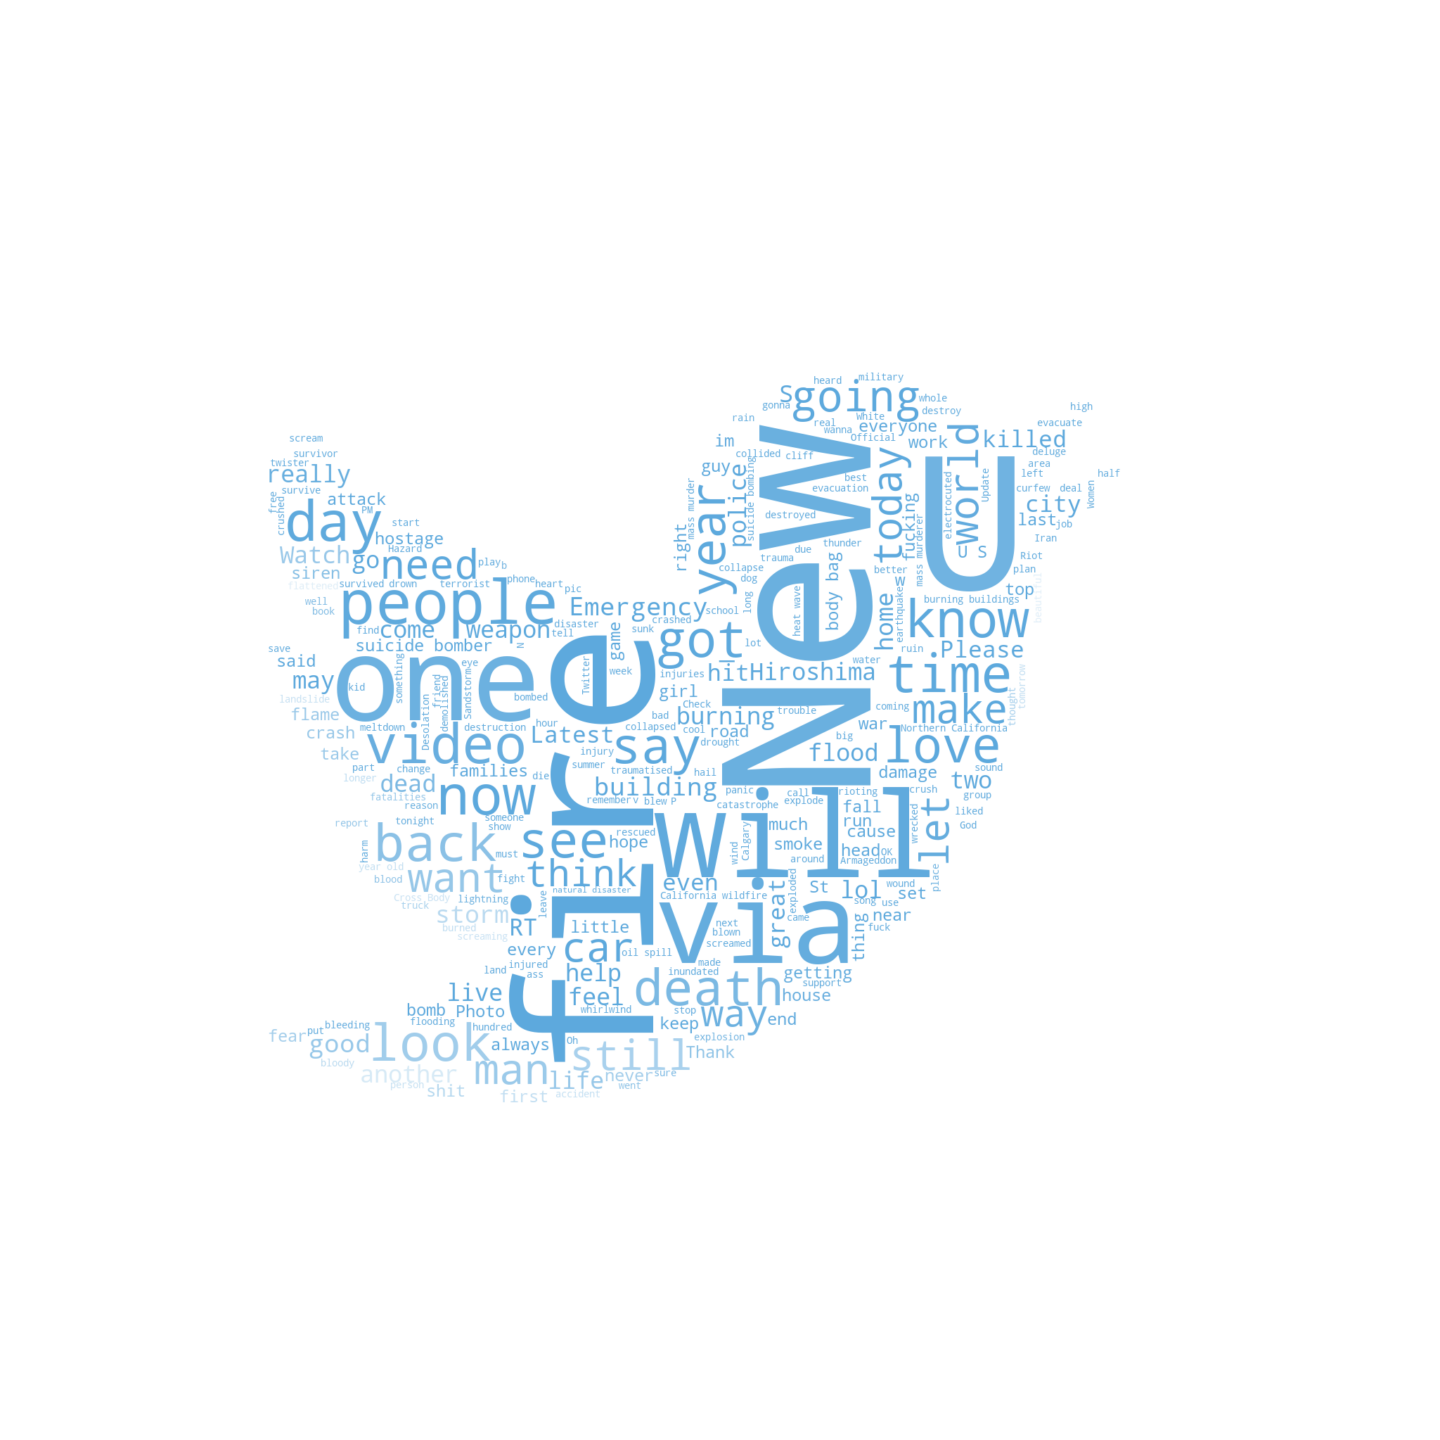 Wordcloud from Tweets related to disaster events